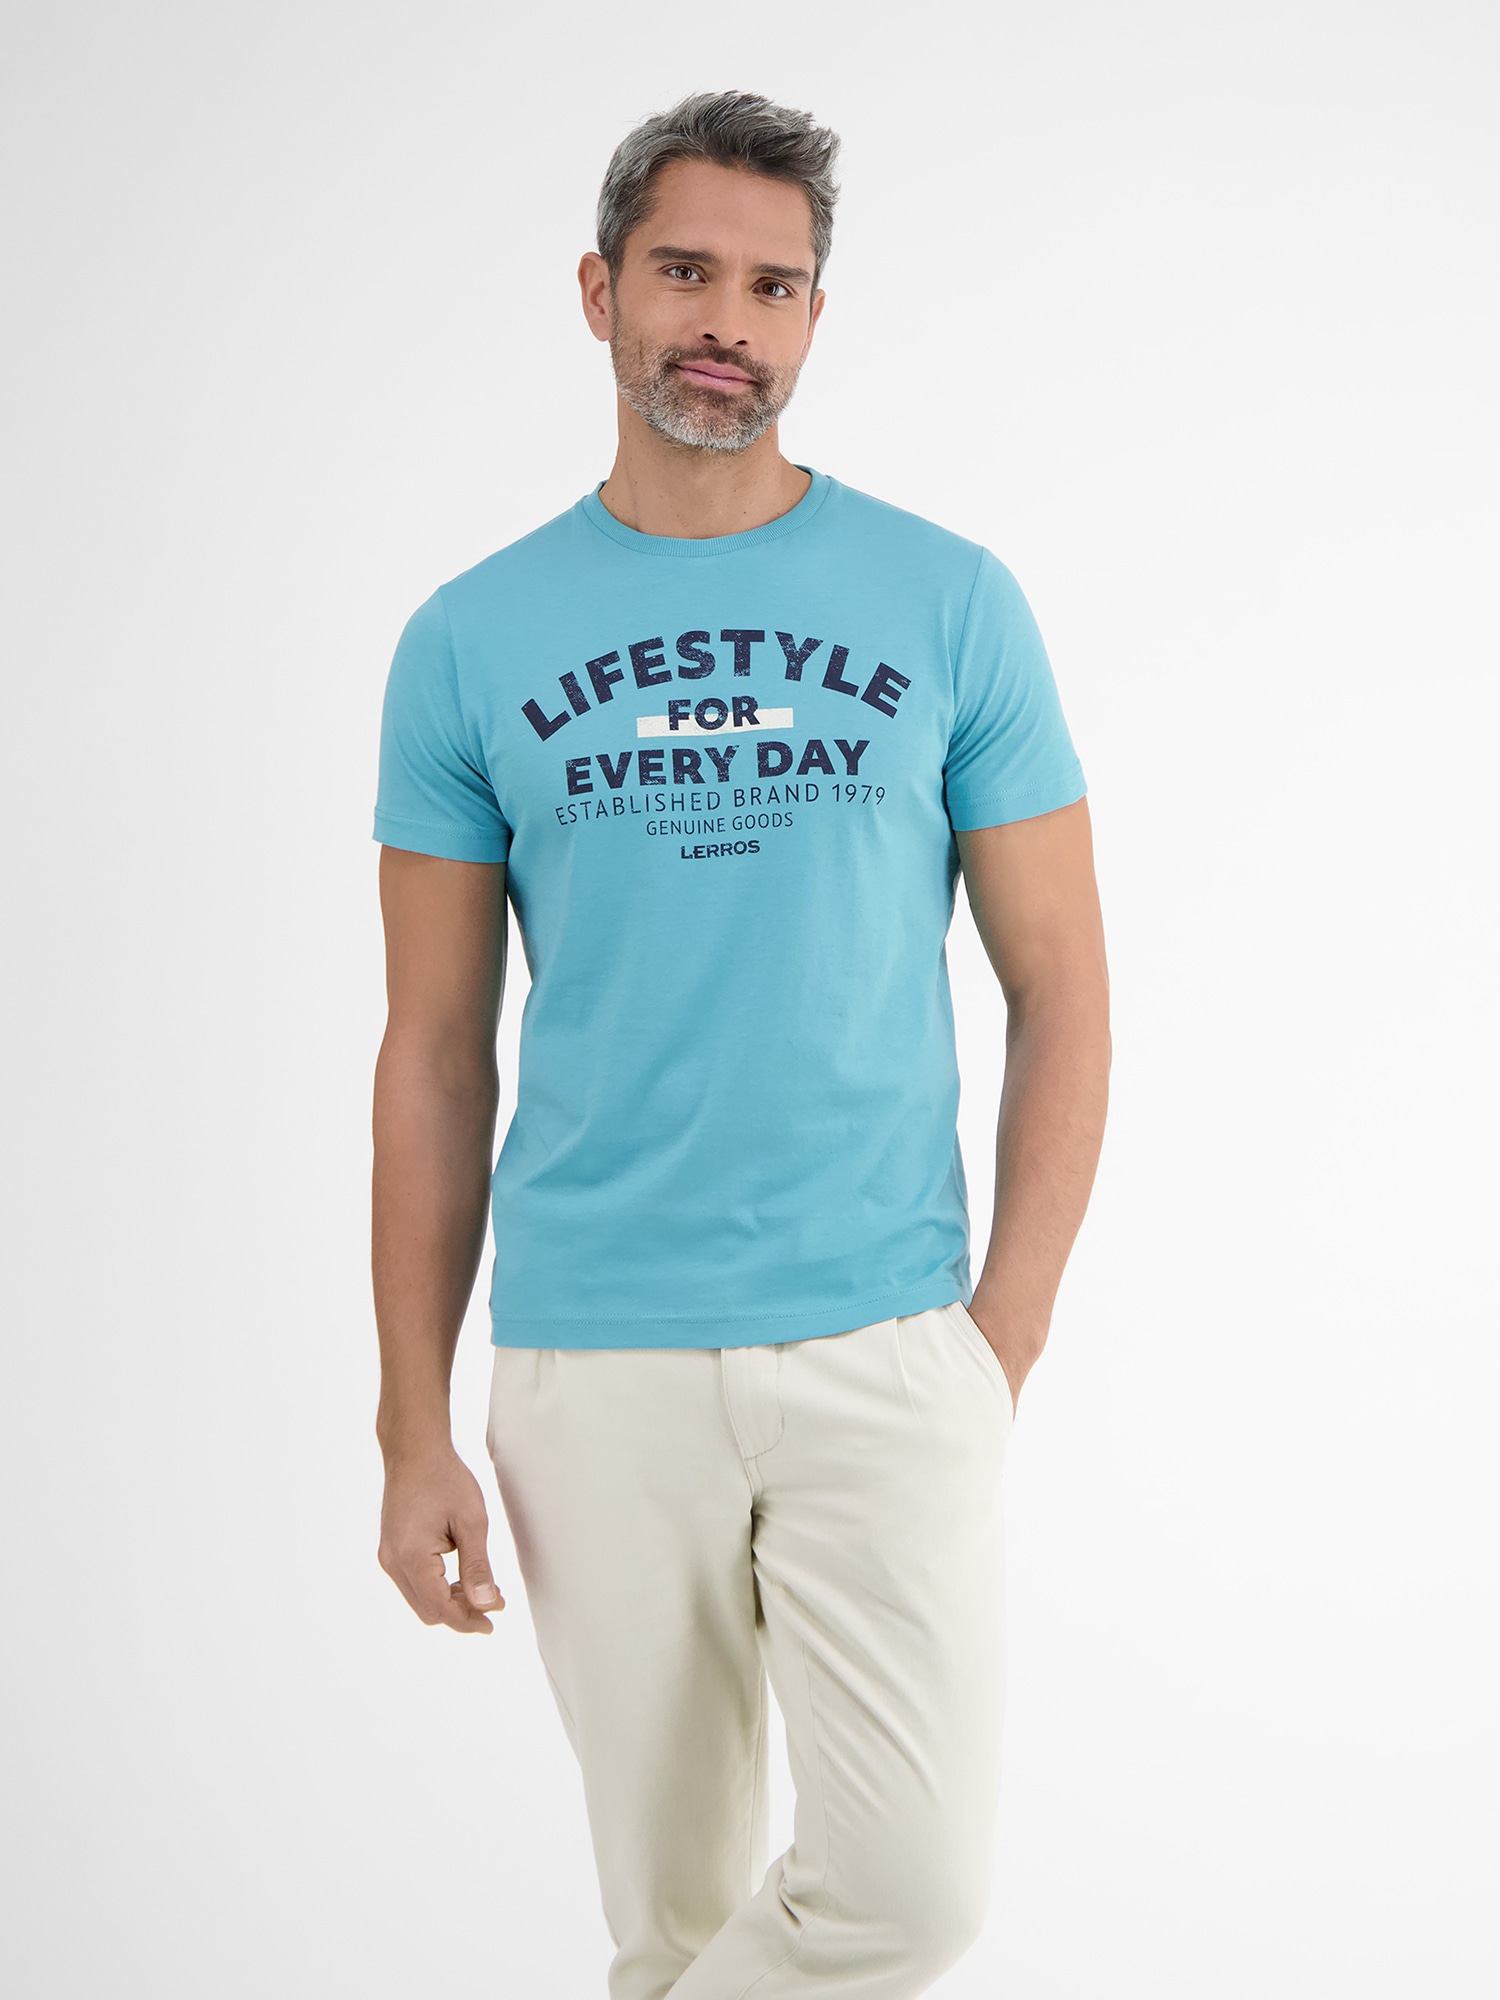 T-Shirt every for bei day*« »LERROS *Lifestyle LERROS T-Shirt ♕